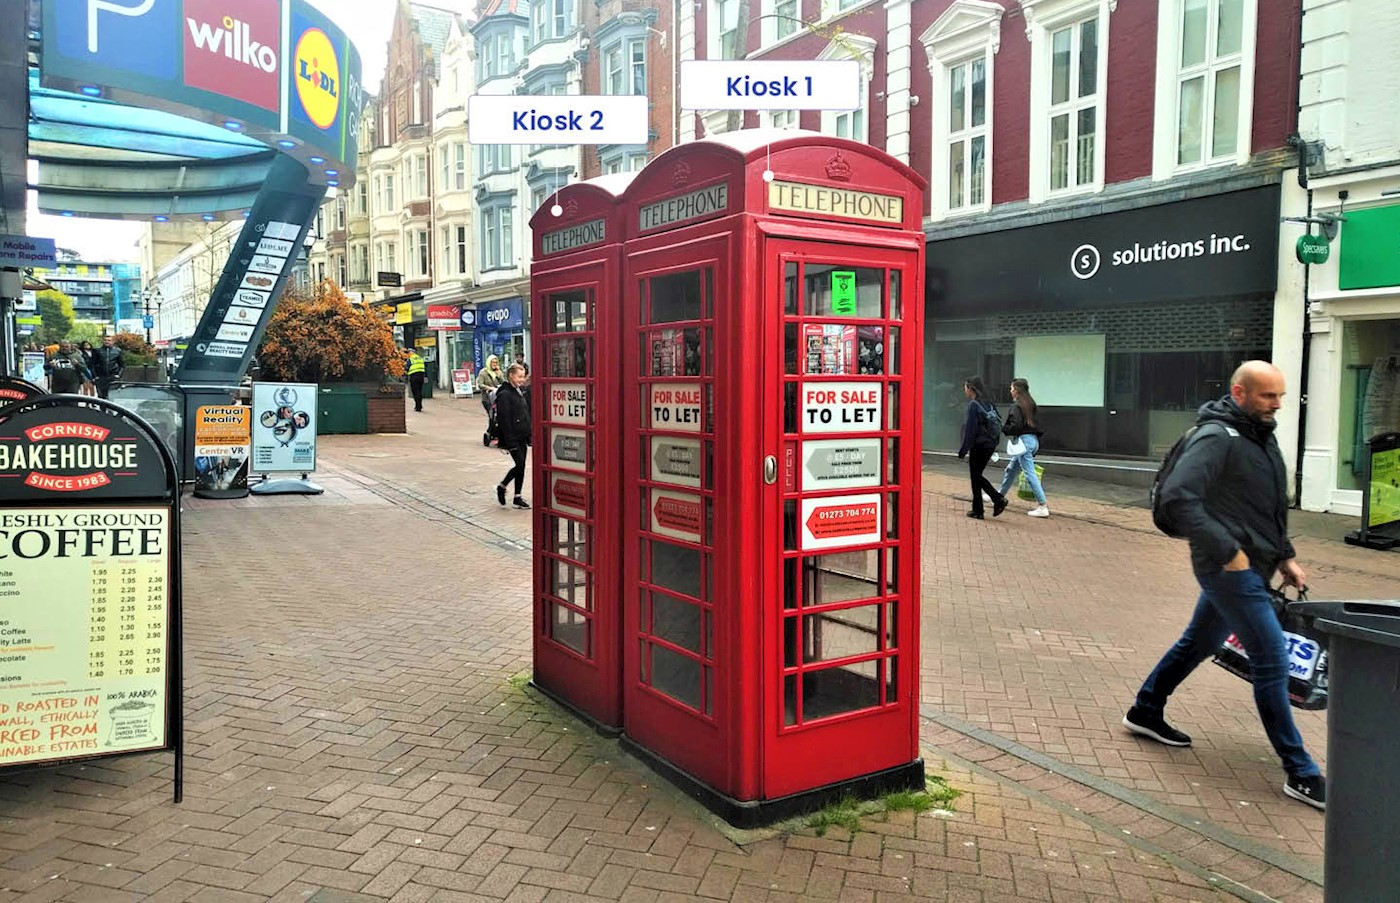 Telephone Kiosk 2 o/s 83 Old Christchurch Road, Bournemouth, BH1 1EP 1/3